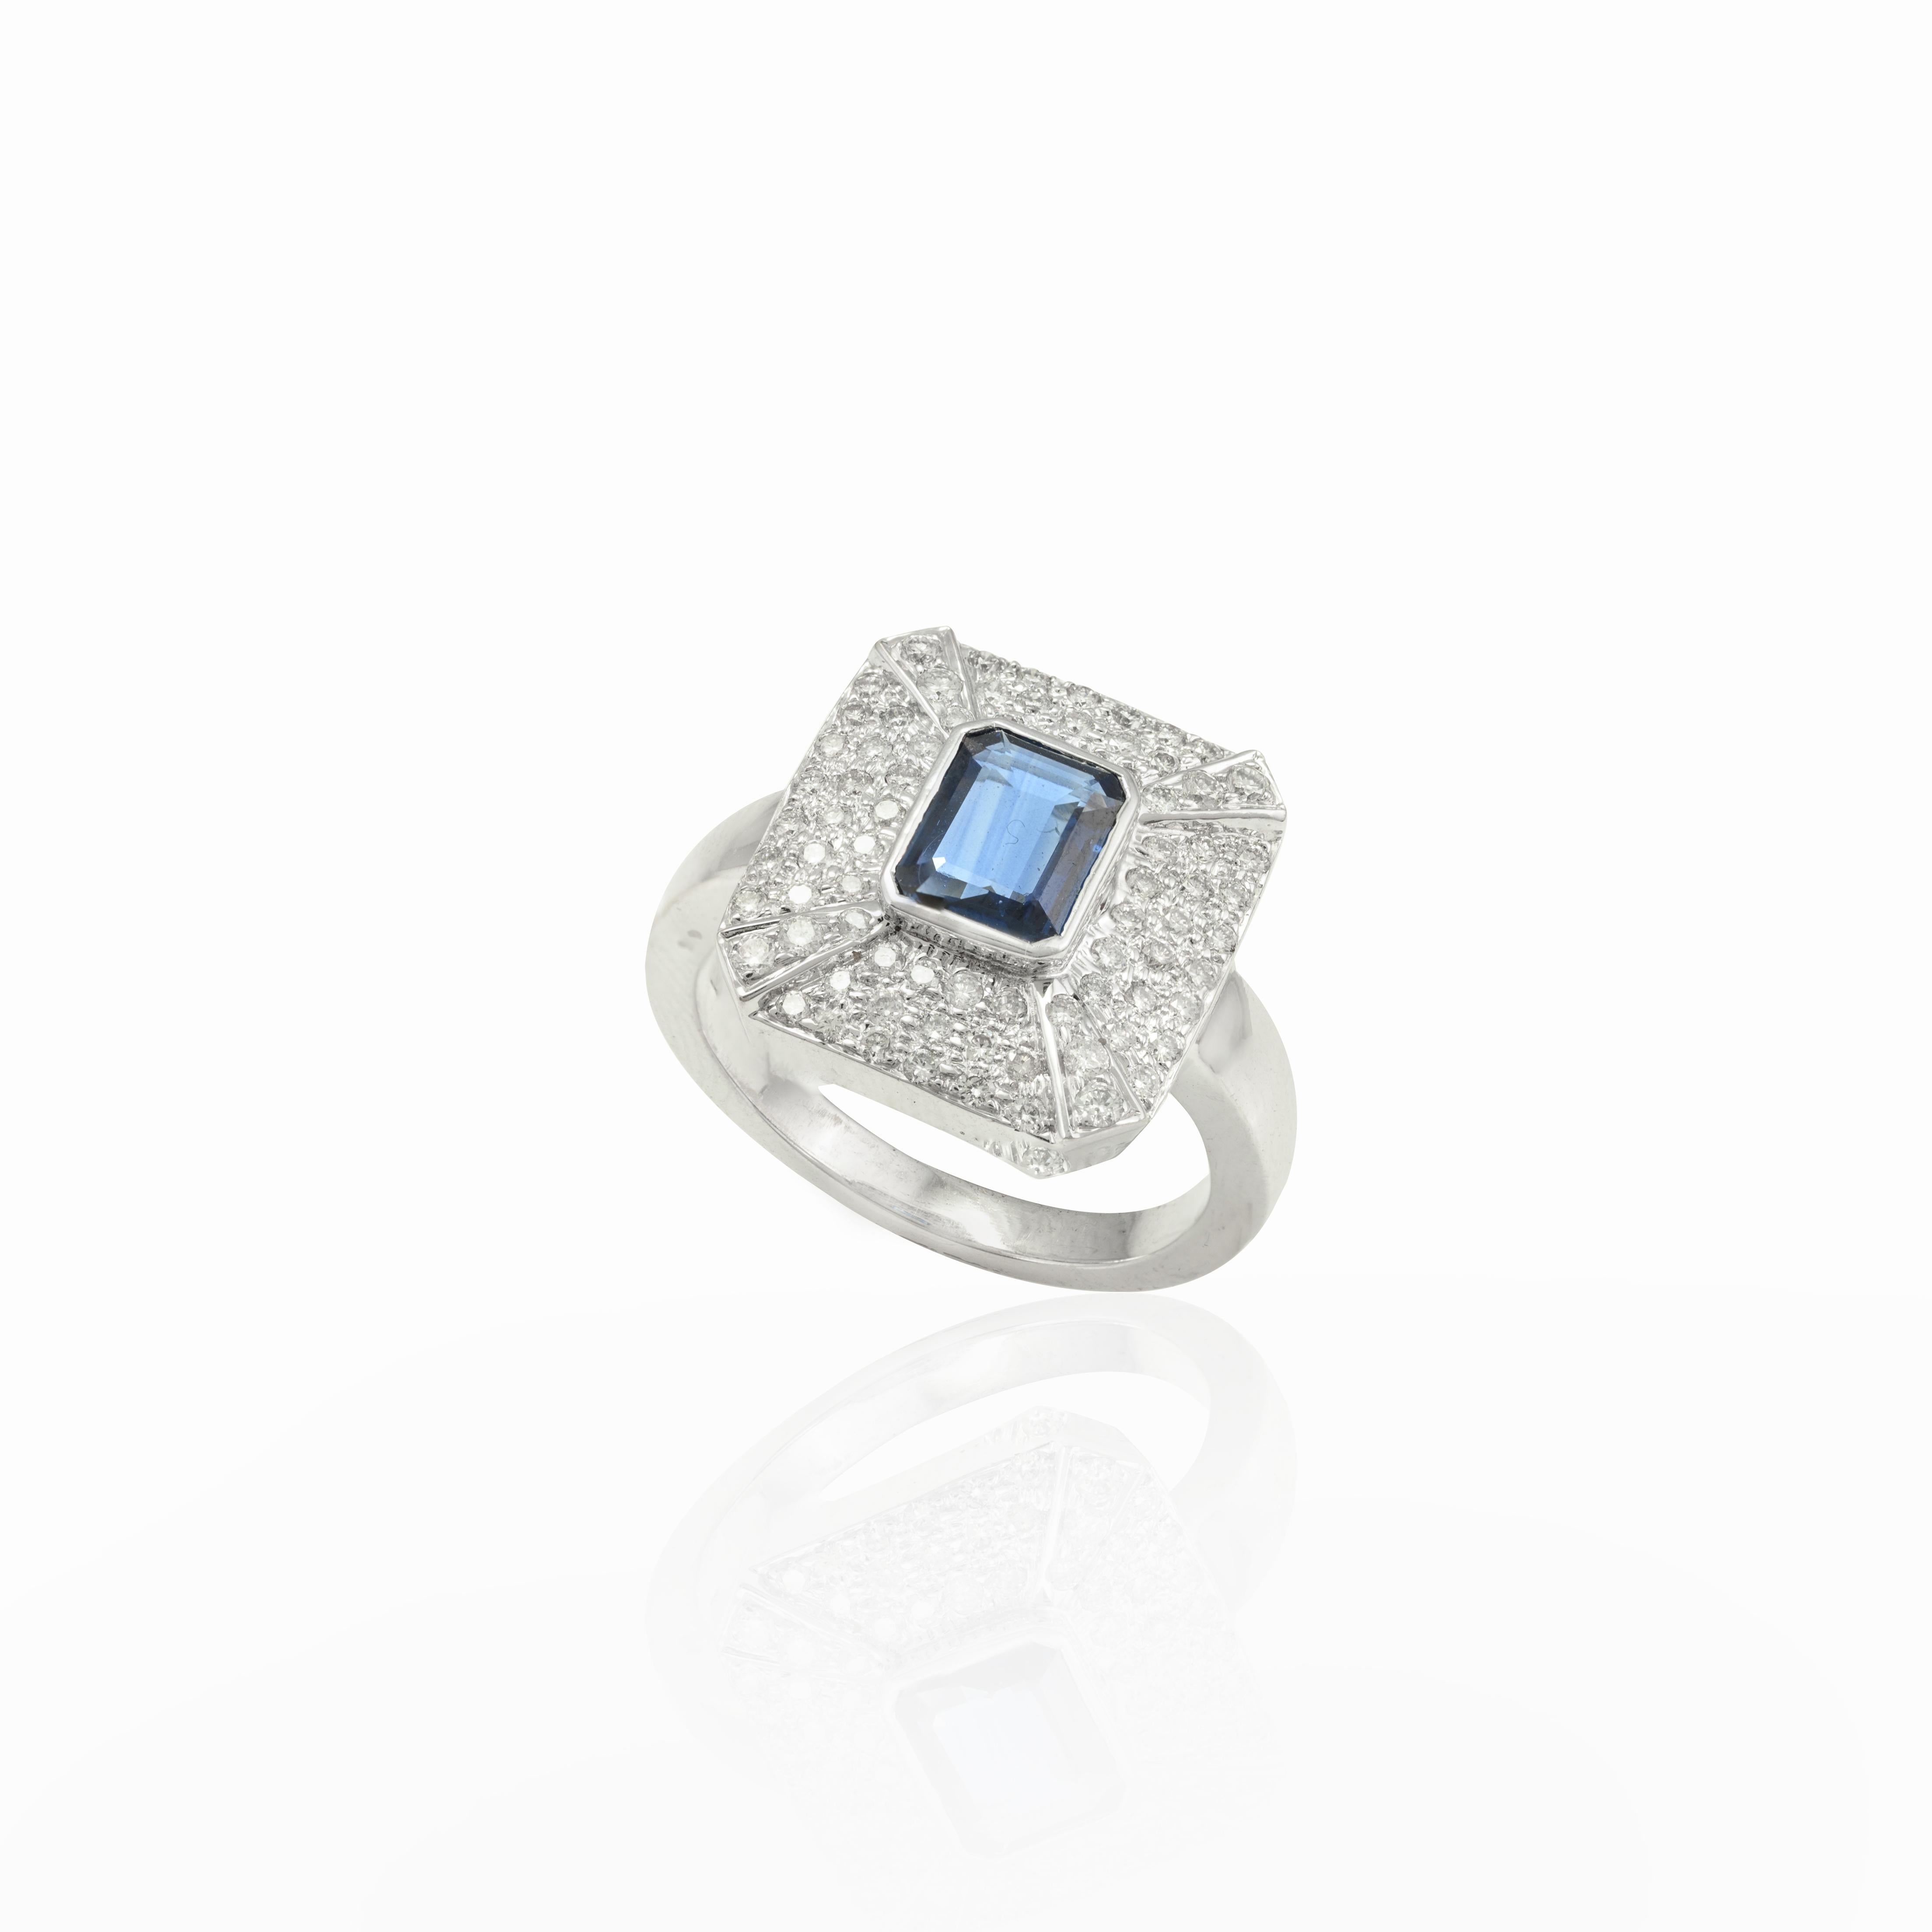 For Sale:  Exquisite Diamond and Emerald Cut Blue Sapphire Ring in 18k Solid White Gold 5